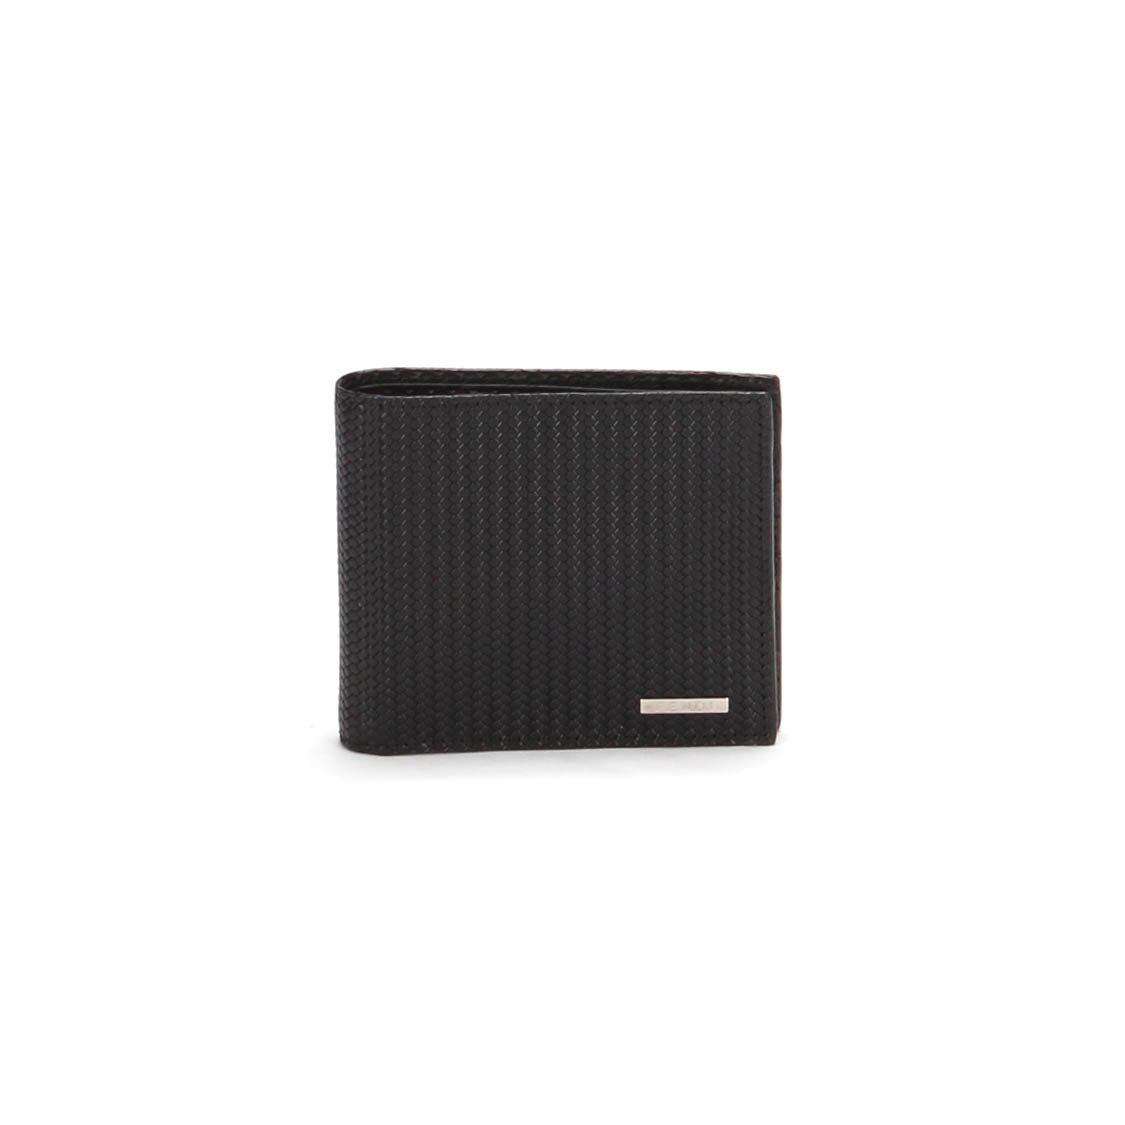 Woven Leather Bi-Fold Small Wallet